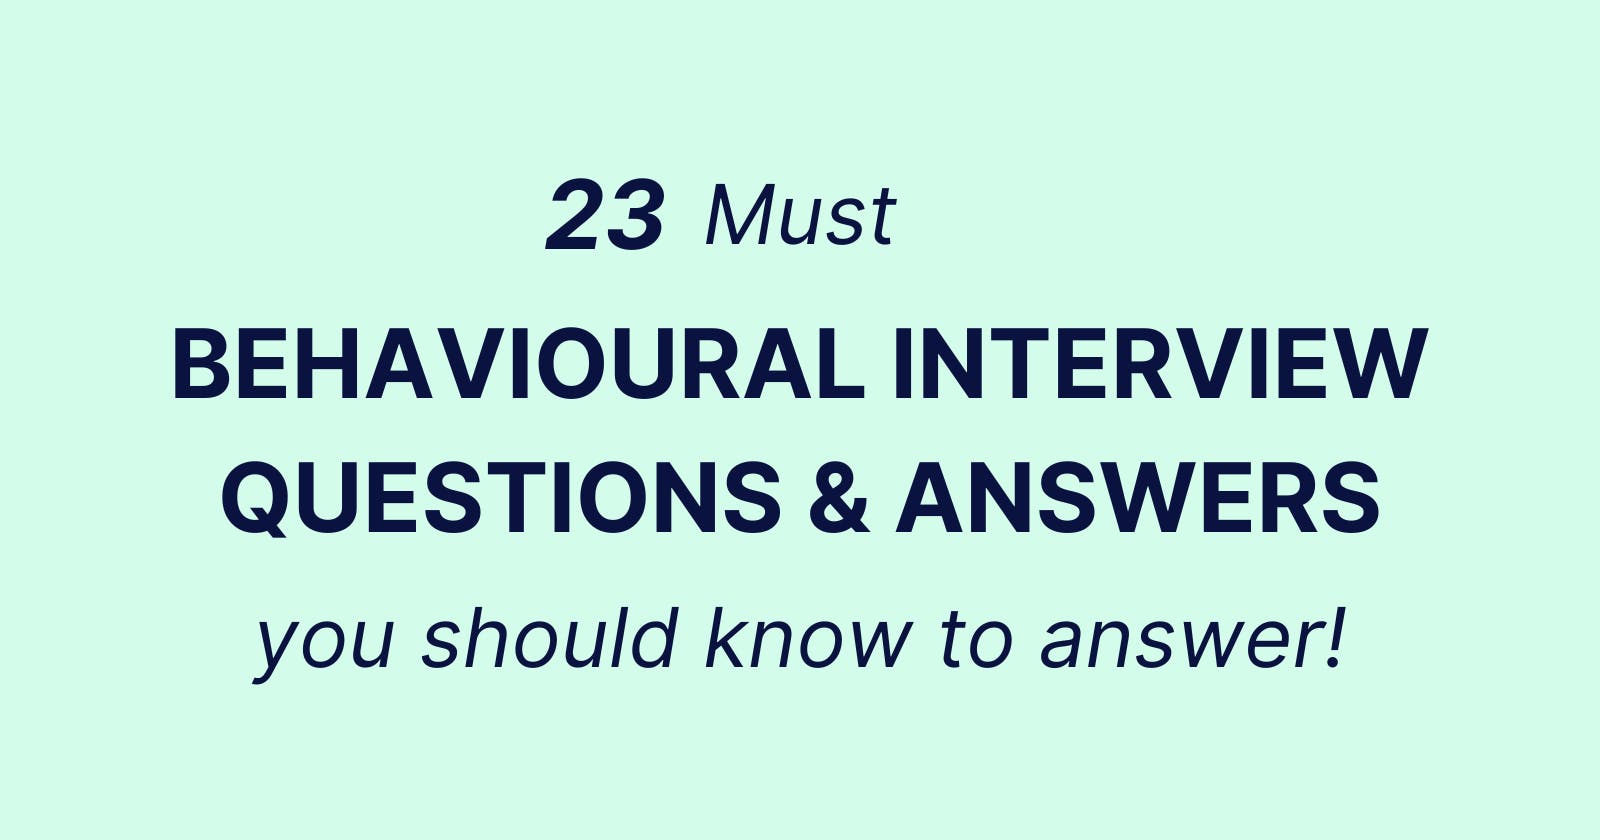 23 Must behavioural interview questions you should know how to answer?